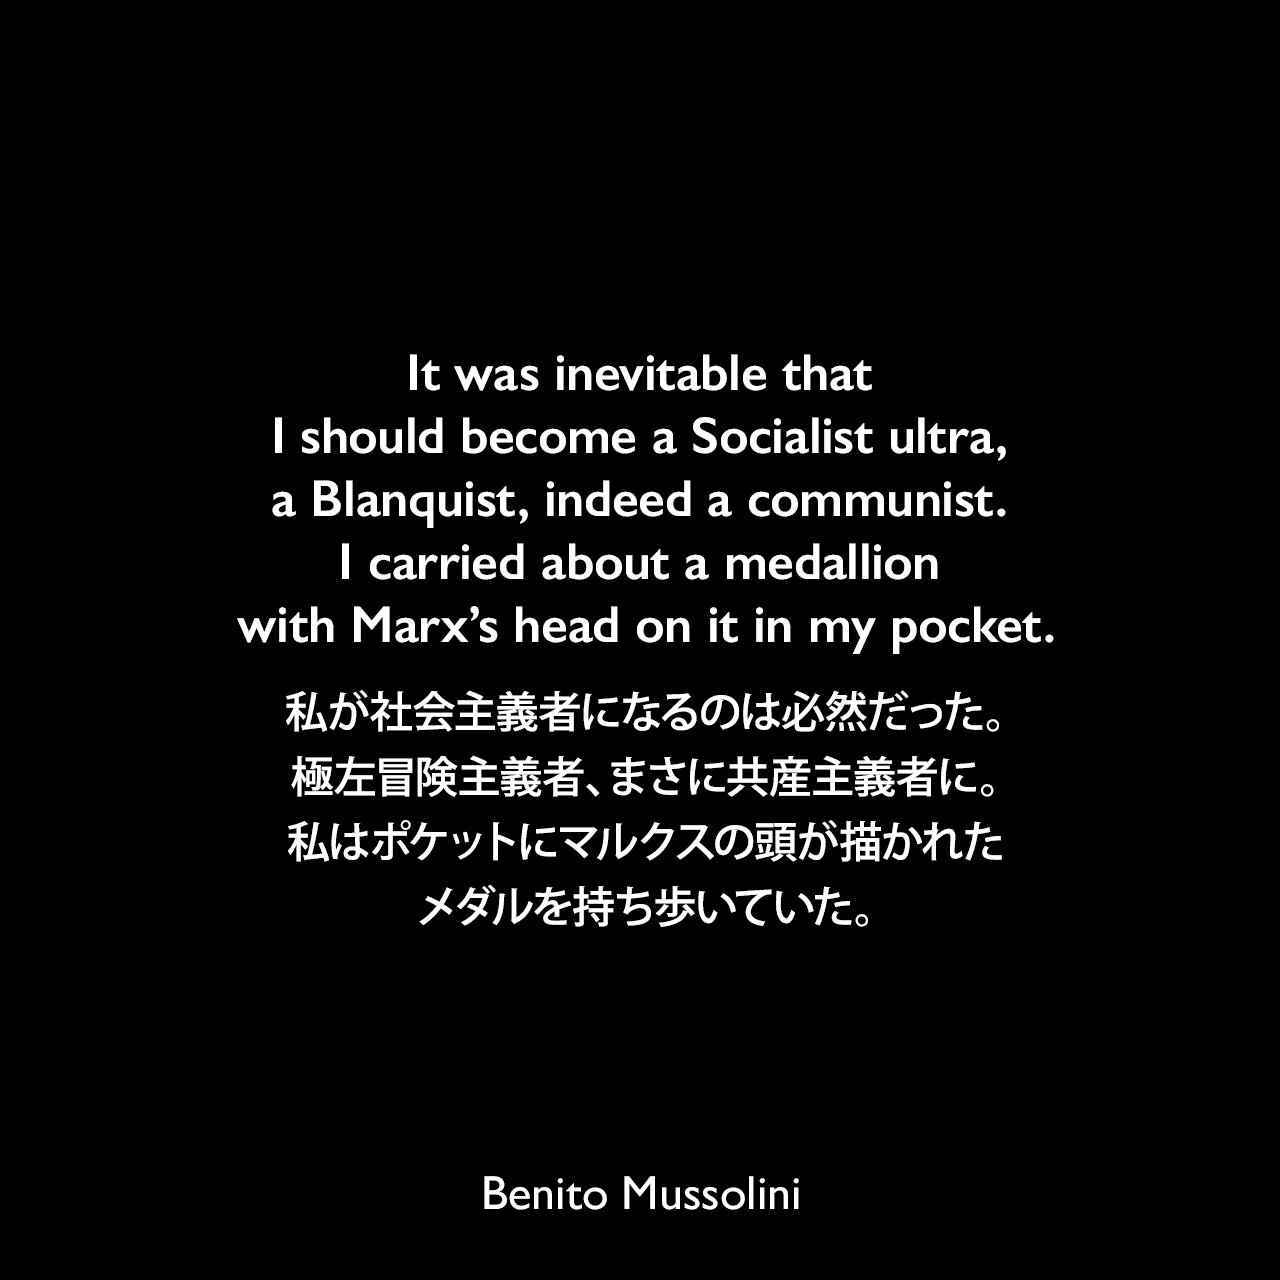 It was inevitable that I should become a Socialist ultra, a Blanquist, indeed a communist. I carried about a medallion with Marx’s head on it in my pocket.私が社会主義者になるのは必然だった。極左冒険主義者、まさに共産主義者に。私はポケットにマルクスの頭が描かれたメダルを持ち歩いていた。- 1932年3月23日から4月4日、ローマのヴェネツィア宮殿でのインタビューよりBenito Mussolini